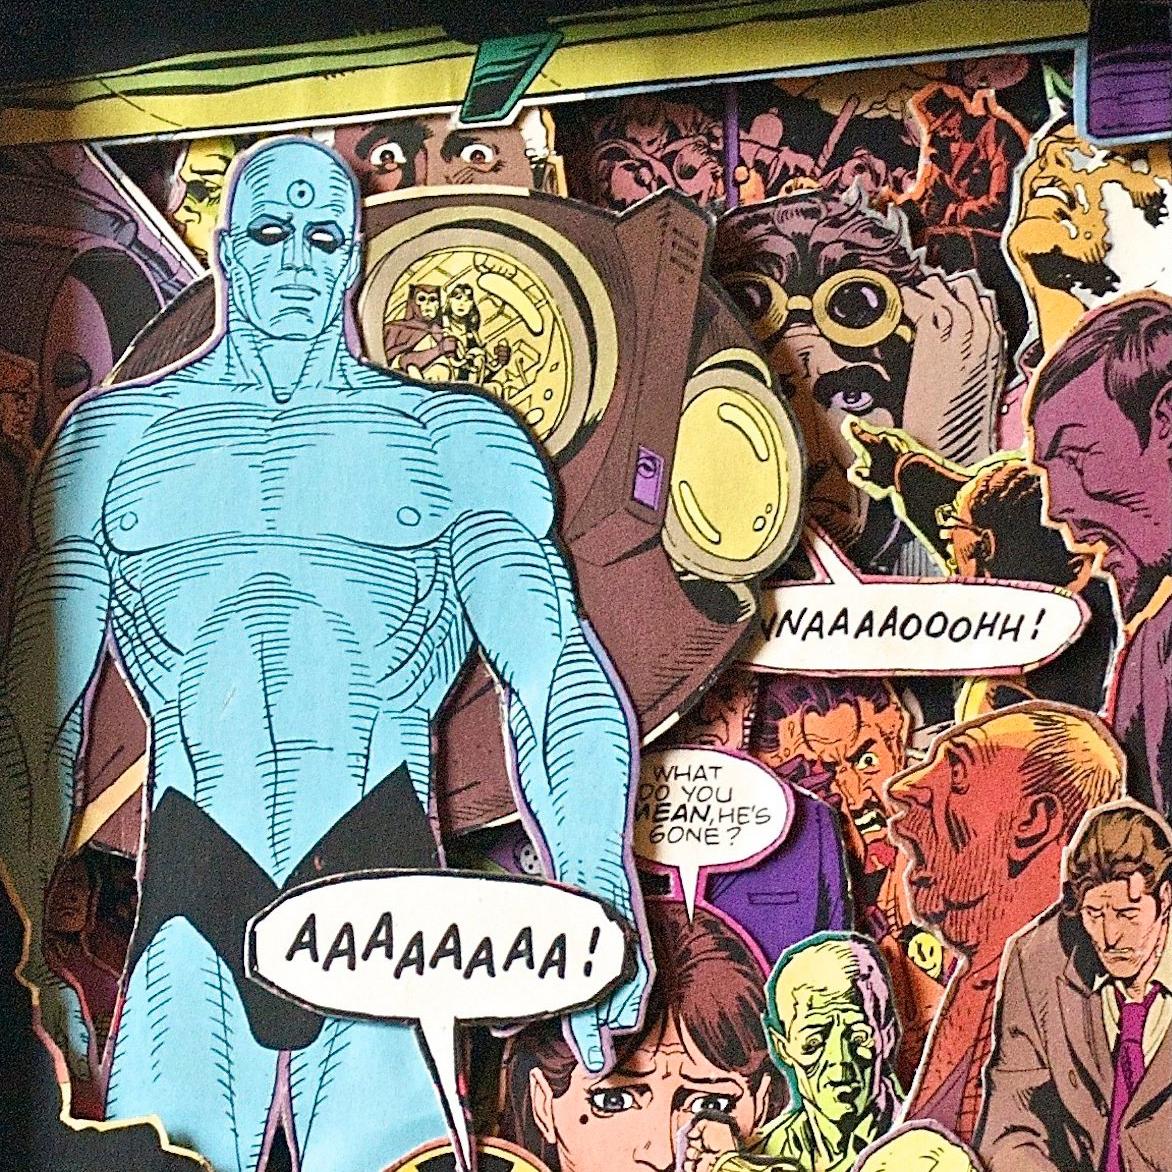 What Do You Mean He's Gone - Watchmen 1